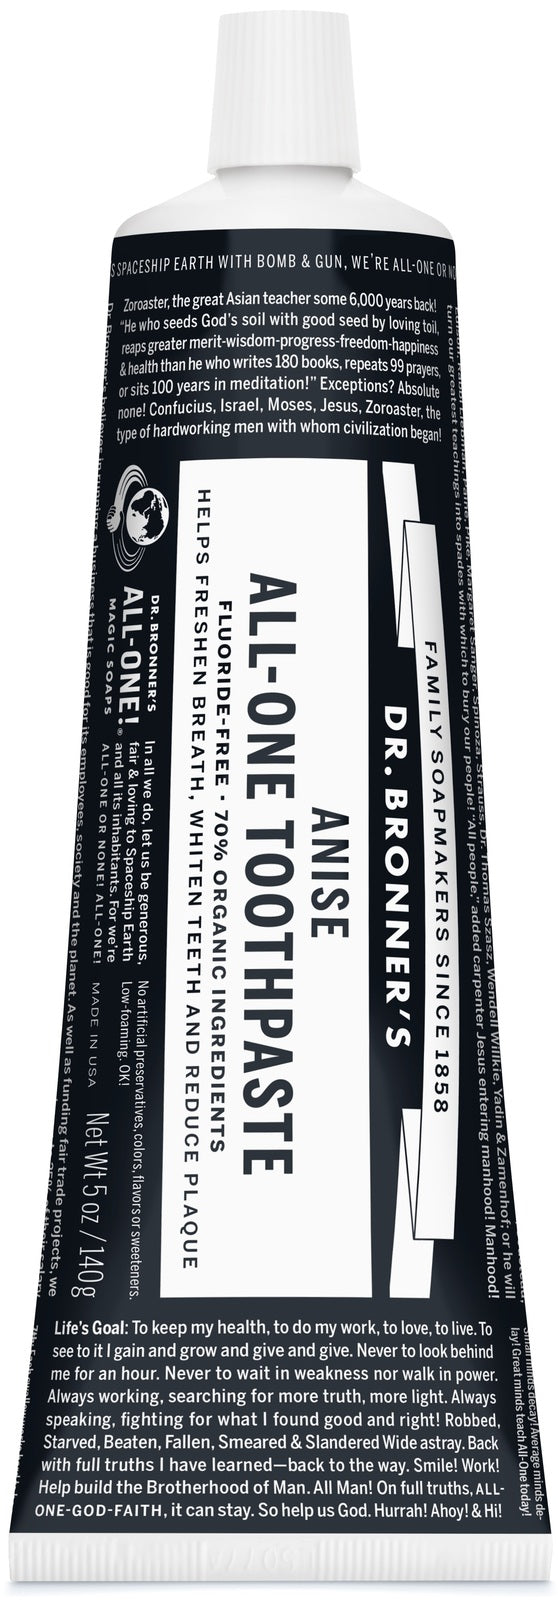 Dr Bronners: Toothpaste - Anise (140gm)